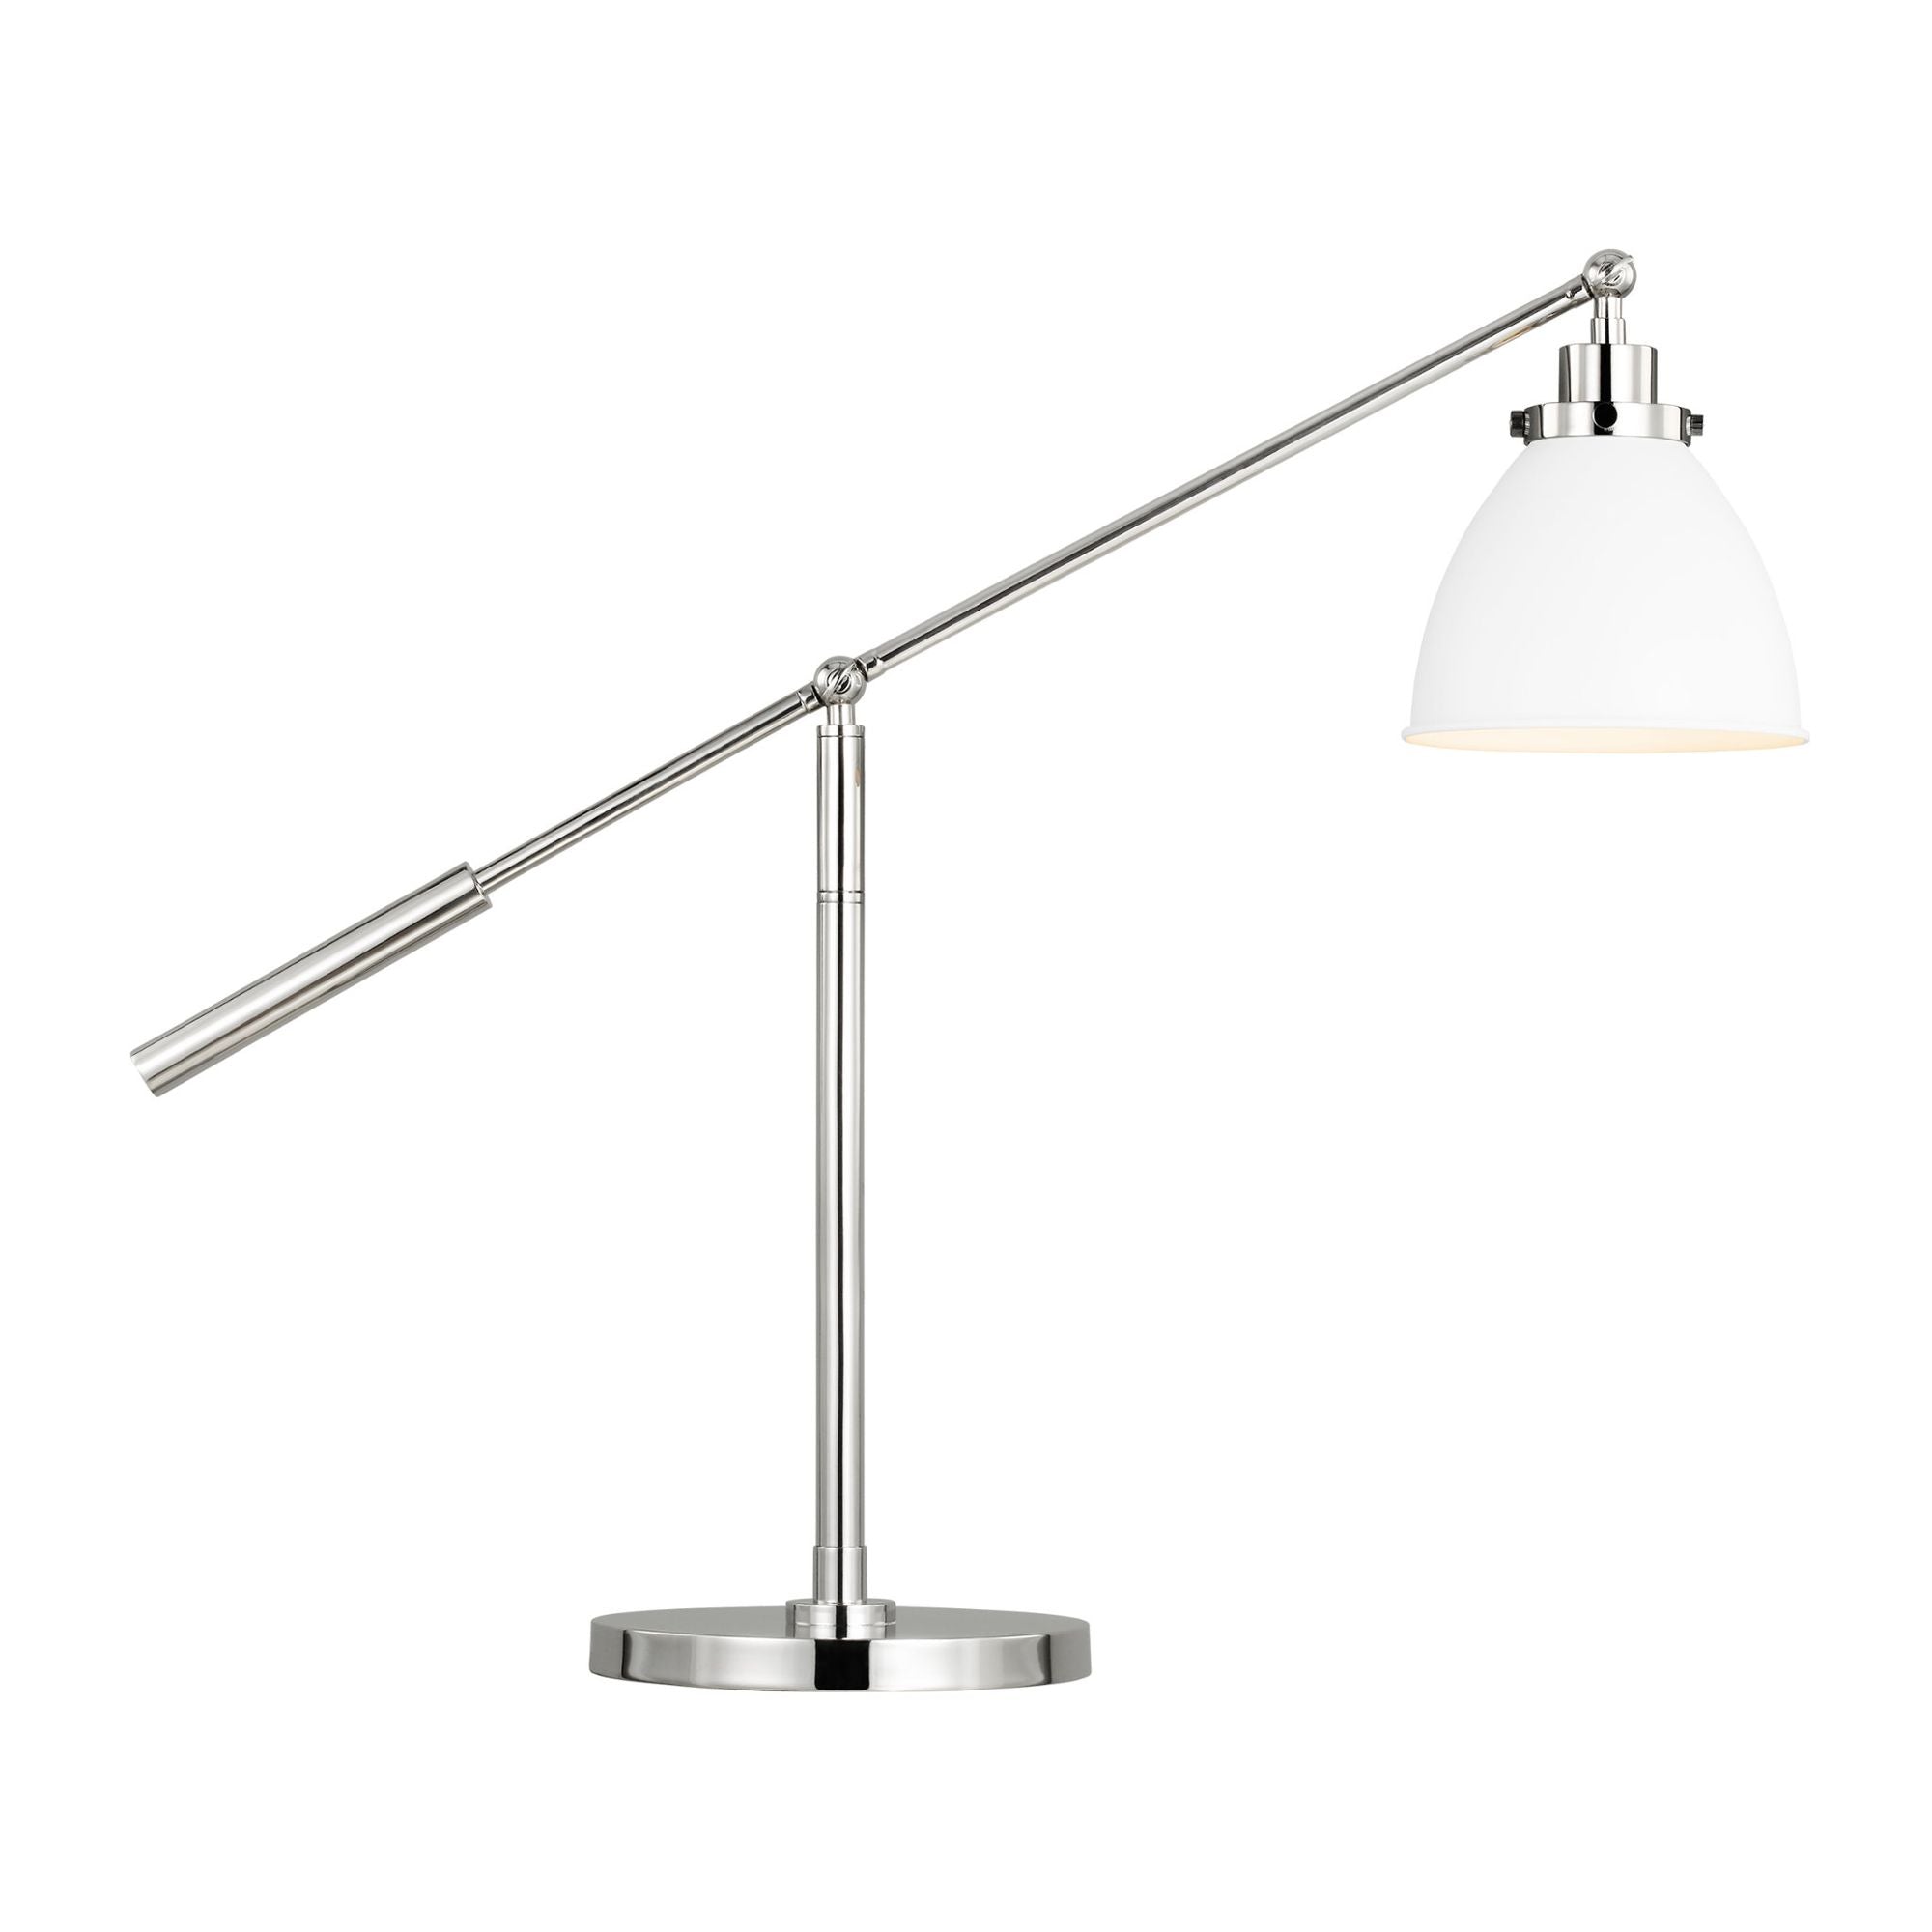 Chapman & Myers Wellfleet Dome Desk Lamp in Matte White and Polished Nickel